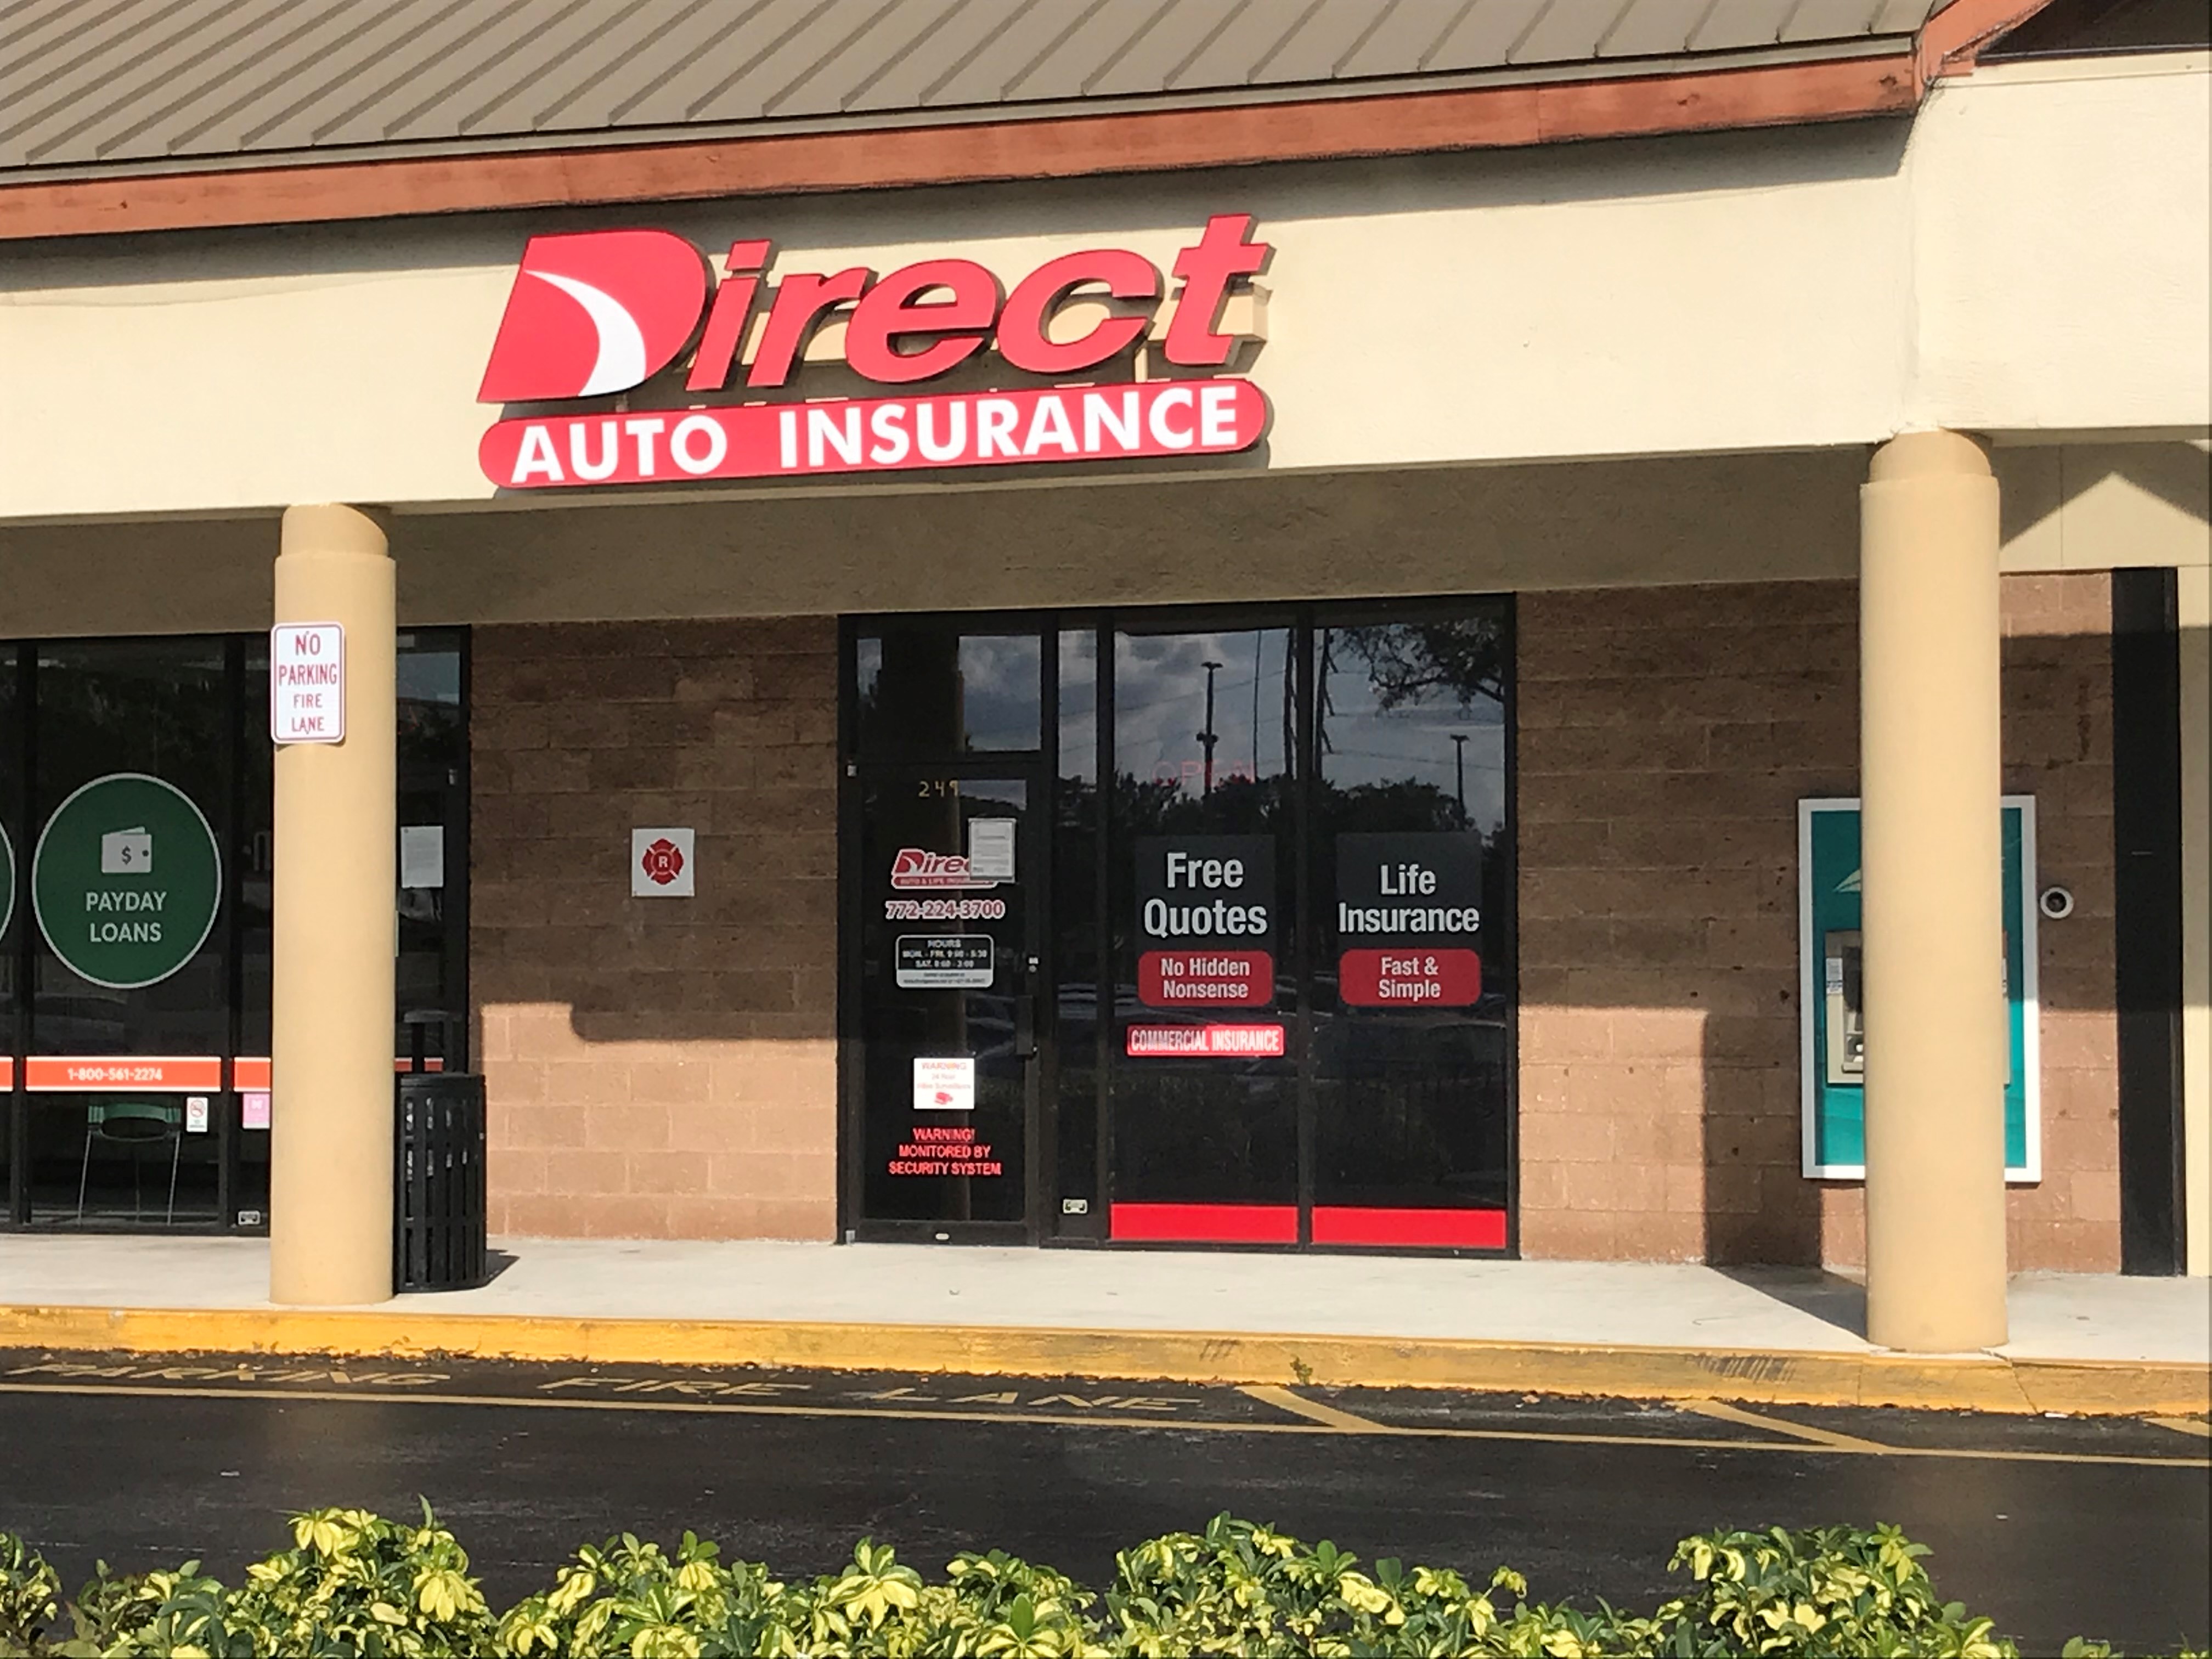 Direct Auto Insurance storefront located at  249 Southwest Port St Lucie Boulevard, Port St Lucie